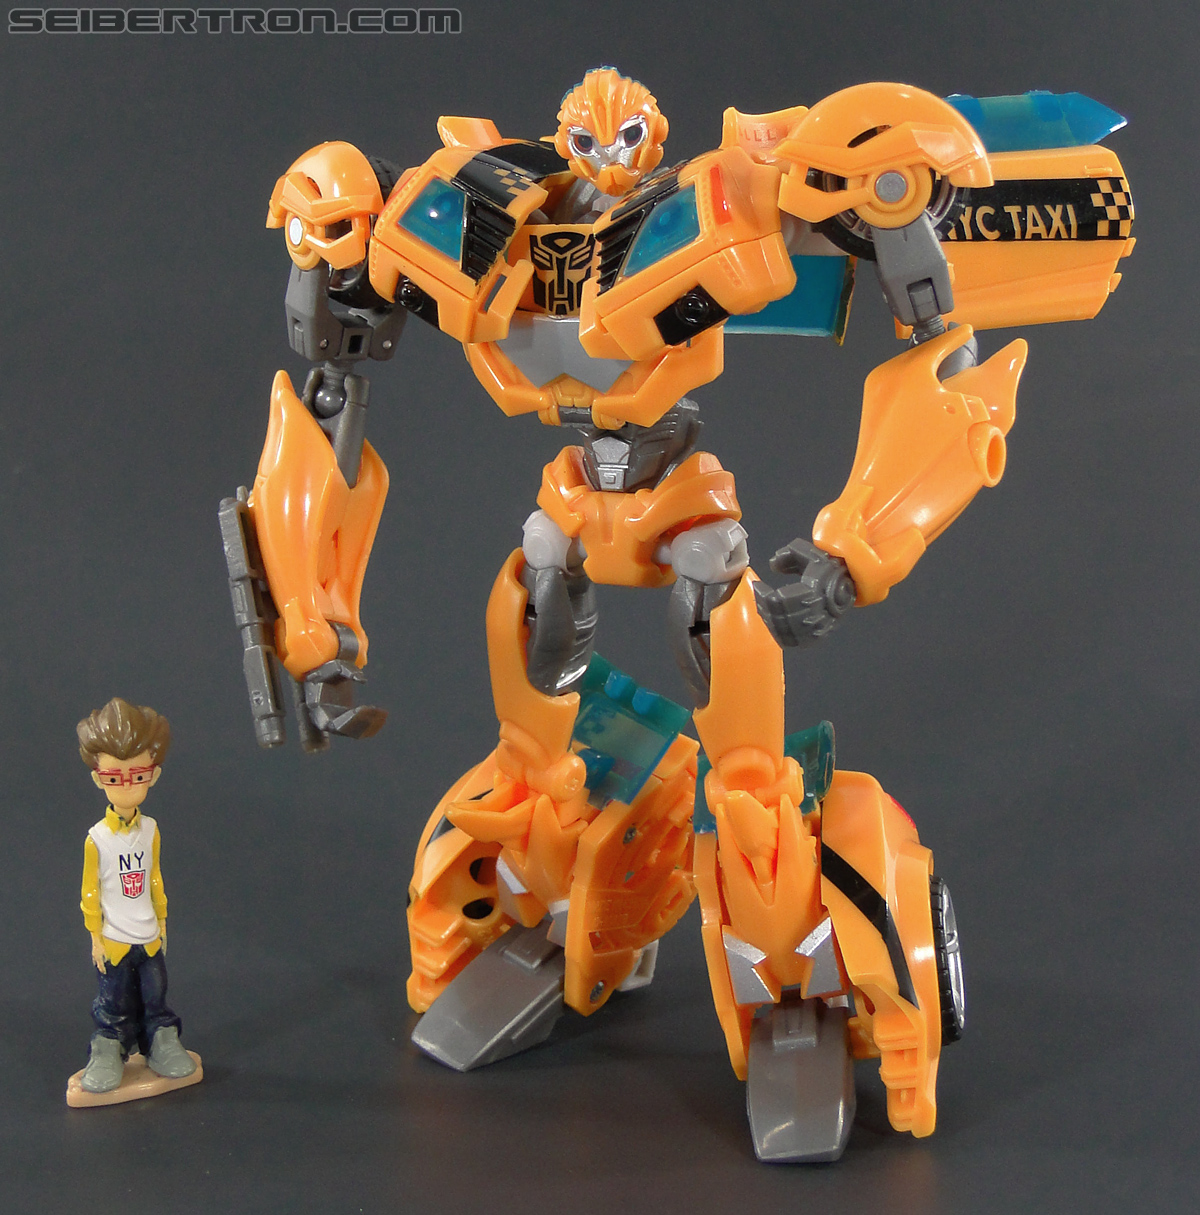 Transformers Prime: First Edition Bumblebee (NYCC) (Image #169 of 185)